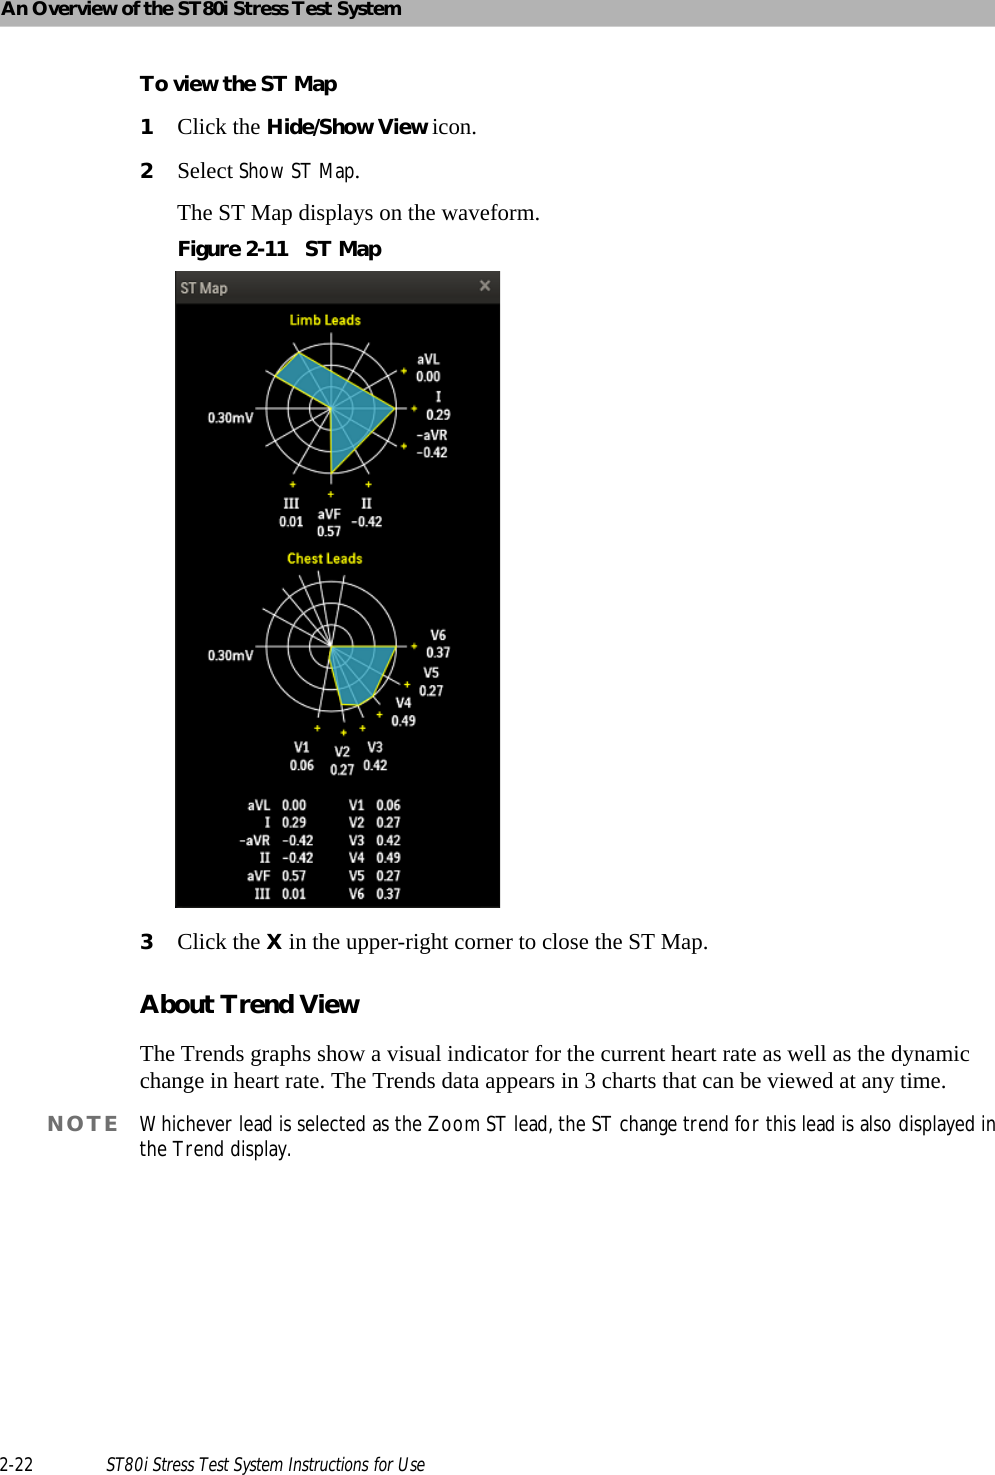 An Overview of the ST80i Stress Test System2-22 ST80i Stress Test System Instructions for UseTo view the ST Map1Click the Hide/Show View icon.2Select Show ST Map.The ST Map displays on the waveform.Figure 2-11 ST Map3Click the X in the upper-right corner to close the ST Map.About Trend ViewThe Trends graphs show a visual indicator for the current heart rate as well as the dynamic change in heart rate. The Trends data appears in 3 charts that can be viewed at any time.NOTE Whichever lead is selected as the Zoom ST lead, the ST change trend for this lead is also displayed in the Trend display.